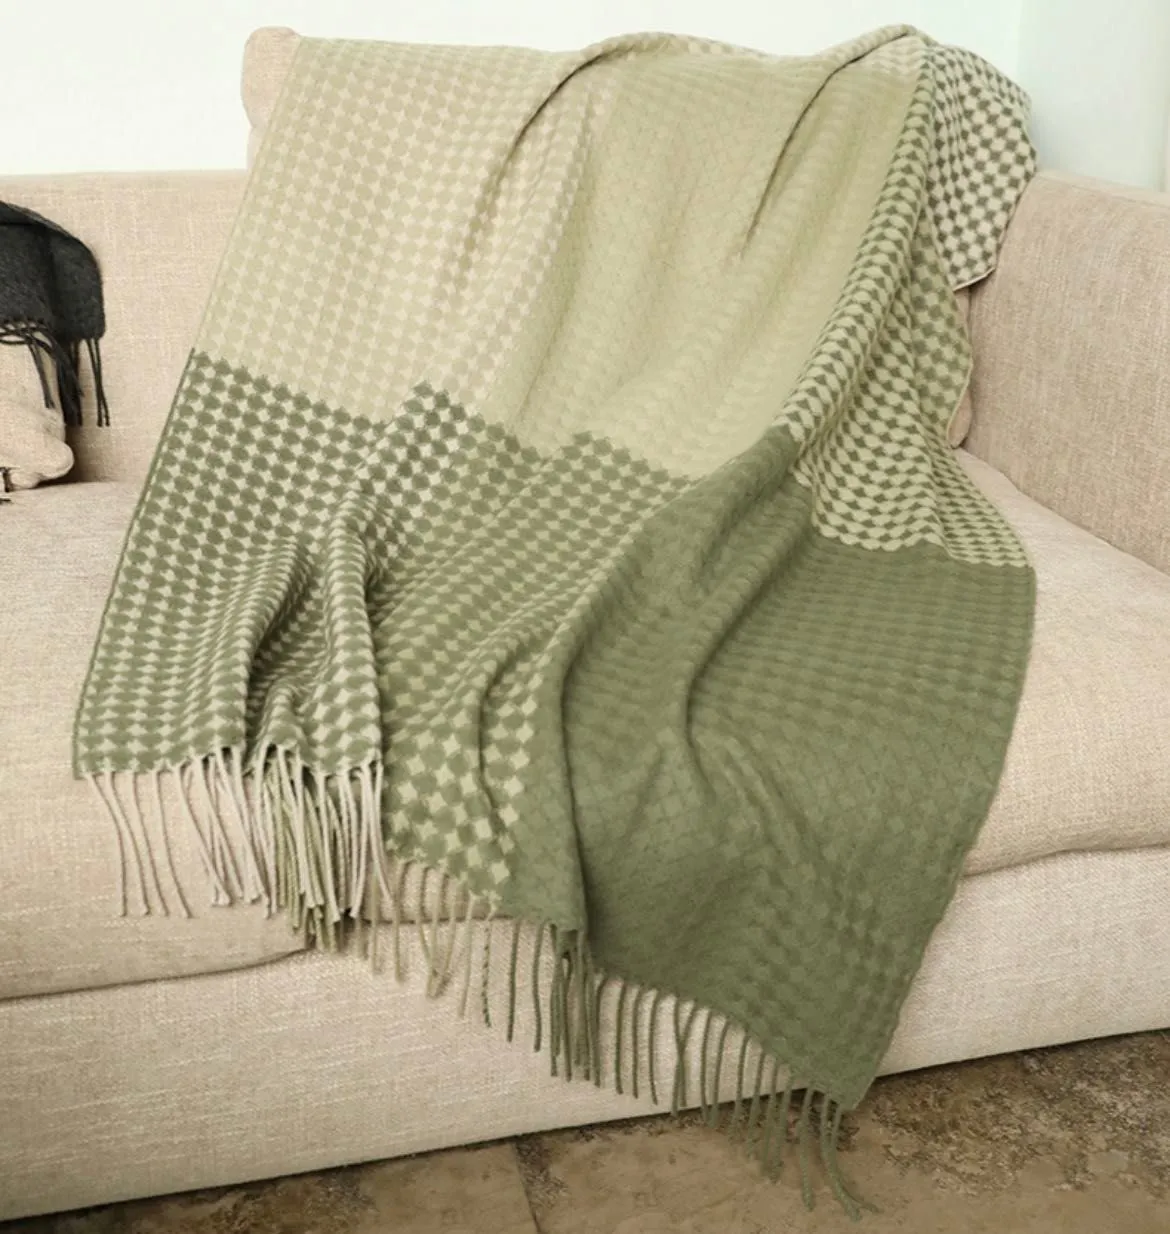 120-200cm European Cashmere Blanket Woven Soft 100% Wool Shawl Portable Warm Sofa Travel Fleece Knitted double-sided Blankets 3 Colors winter warm skin